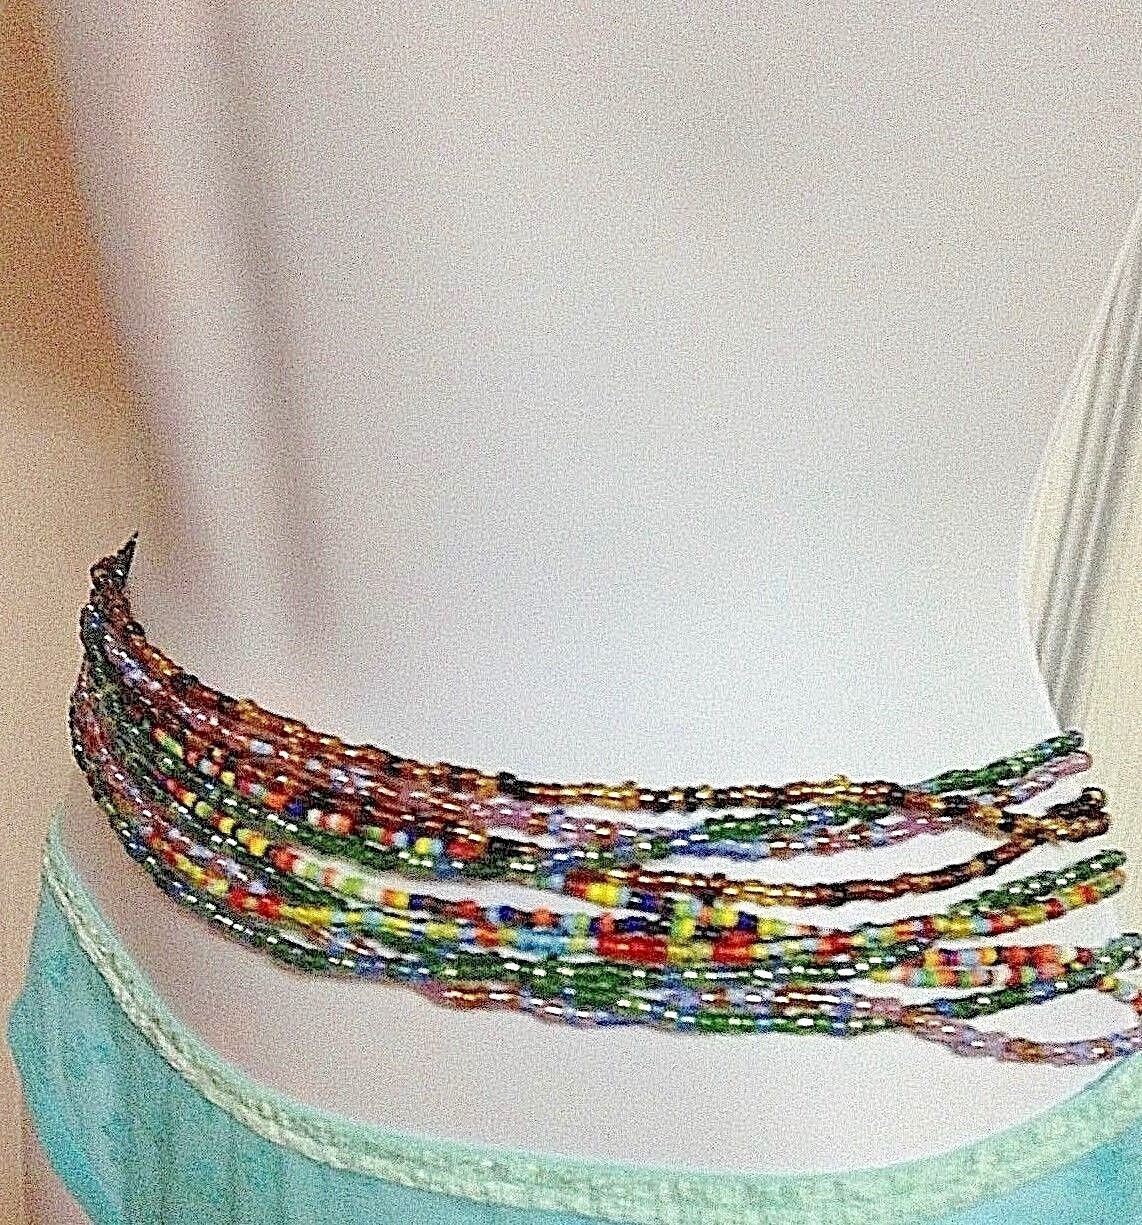  SEXY VARIOUS MULTI-TONE/ COLORED WAIST BEADS 0-50 INCHES AVALIABLE  Без бренда